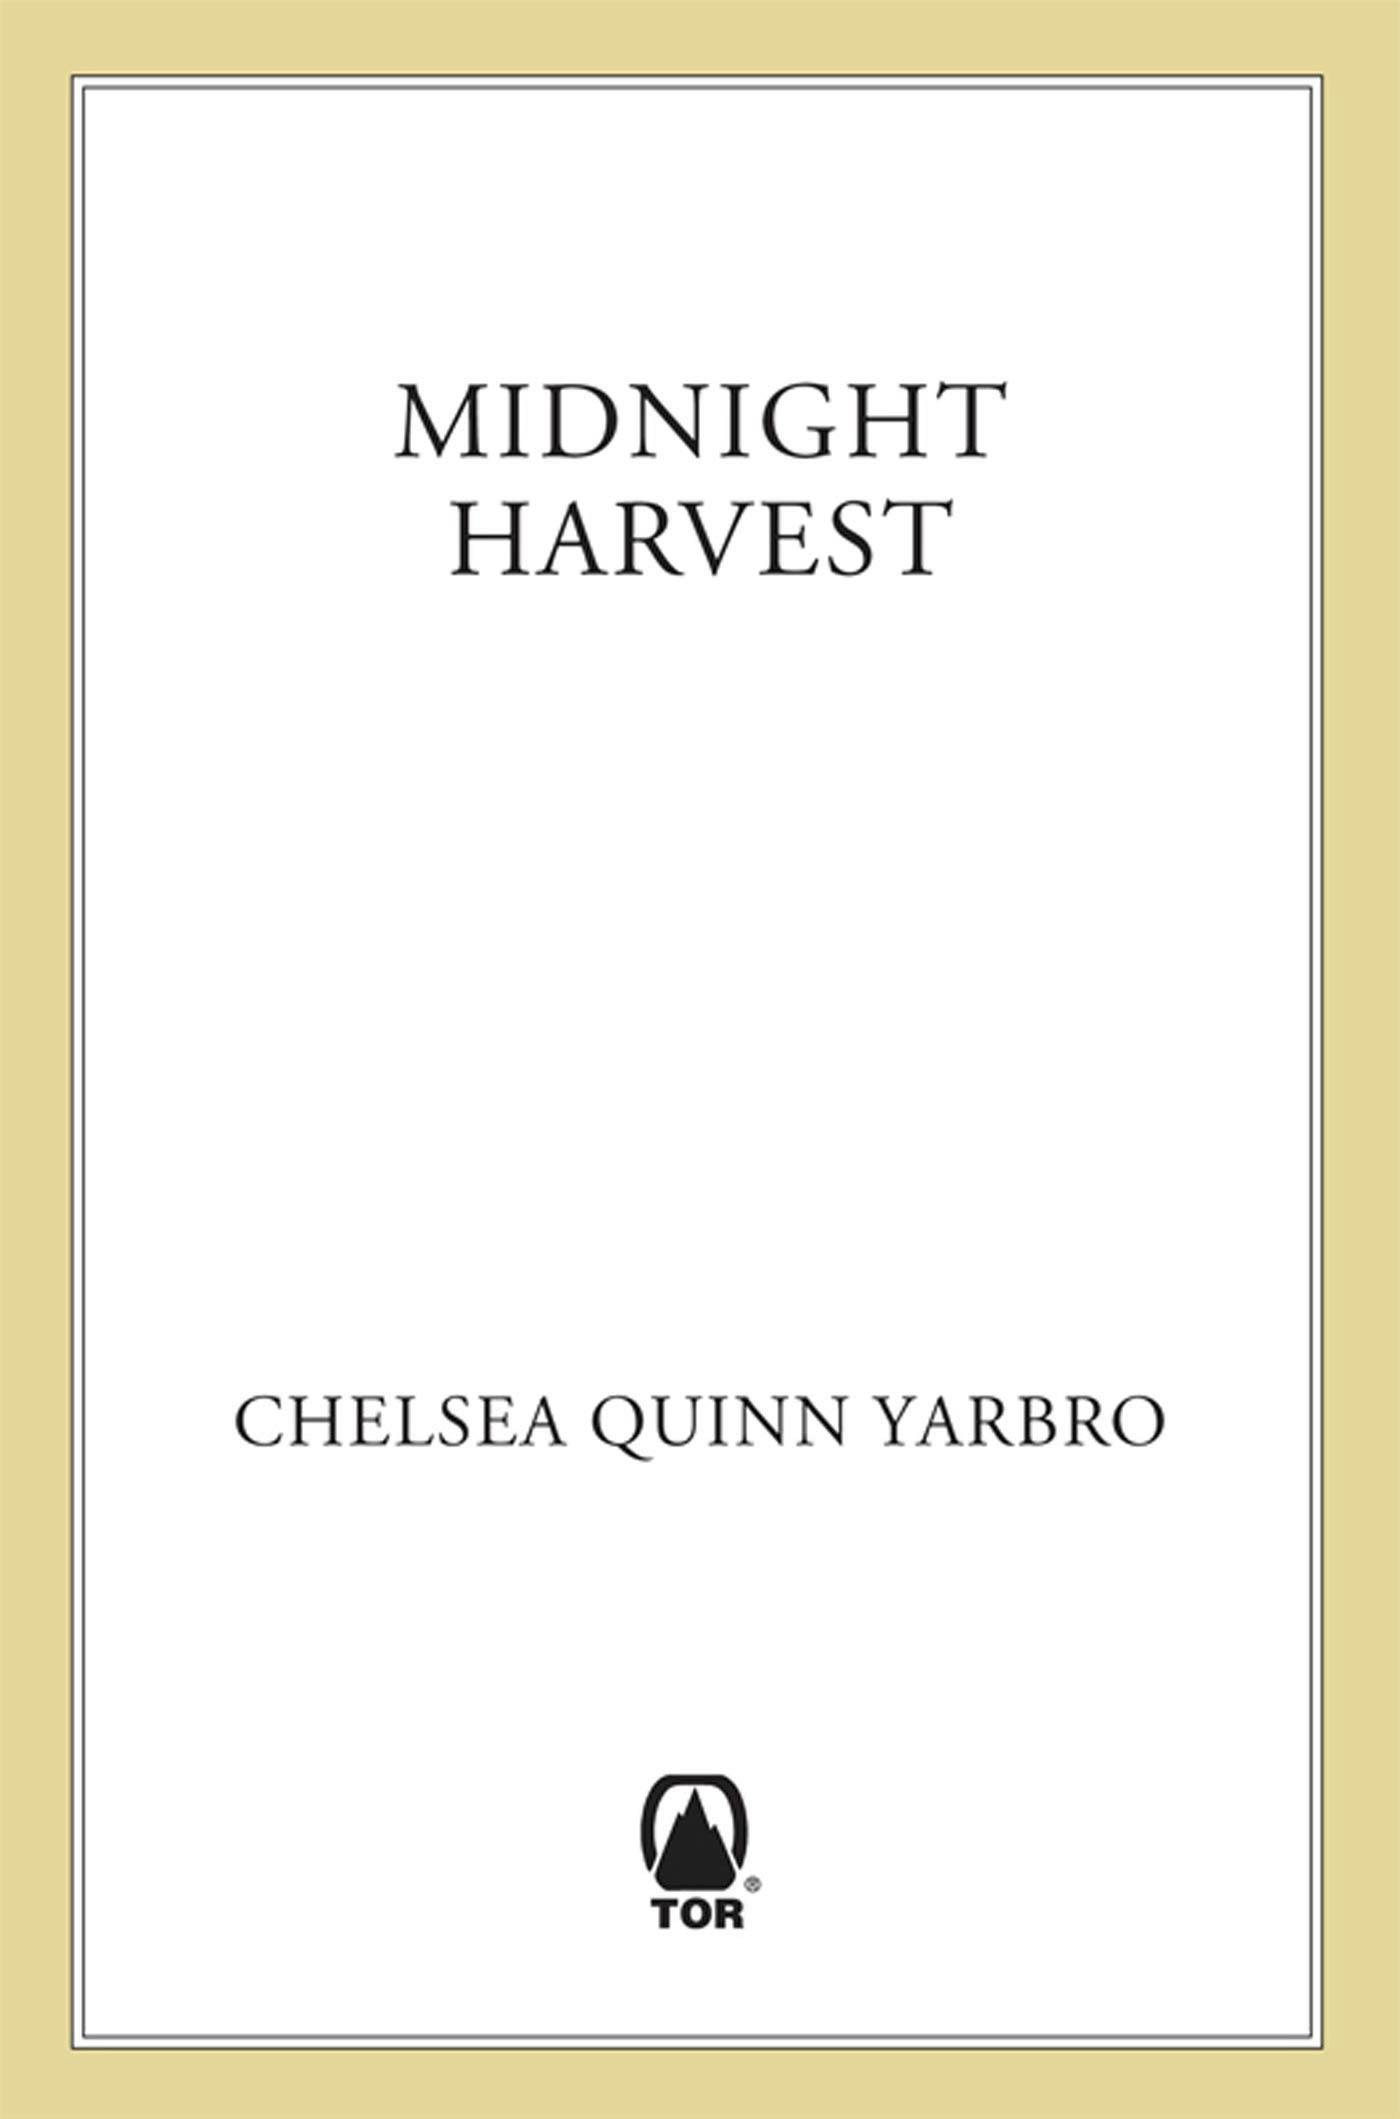 Cover for the book titled as: Midnight Harvest